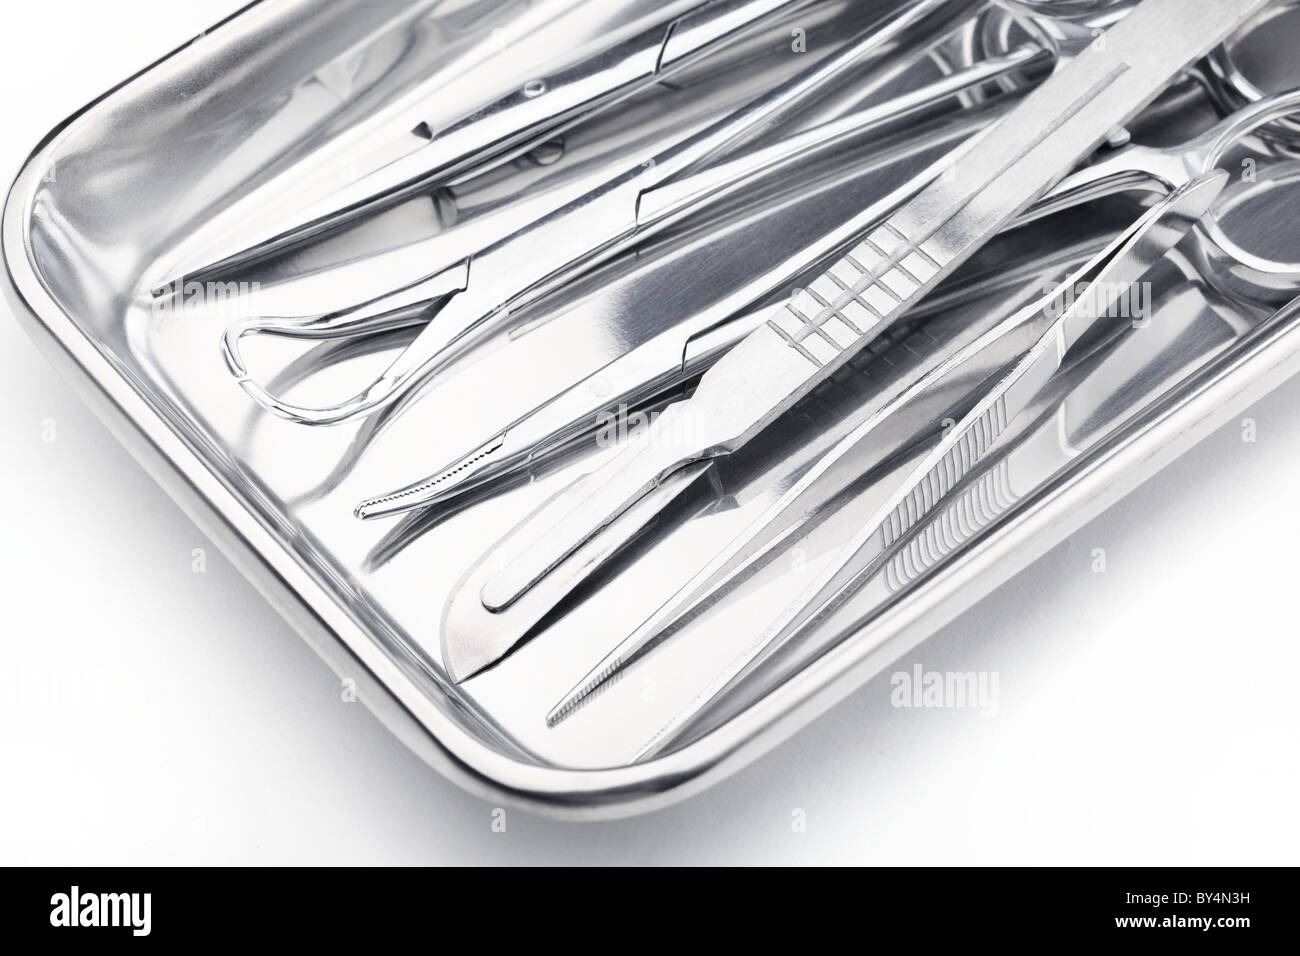 Medical instruments in a steel tray Stock Photo